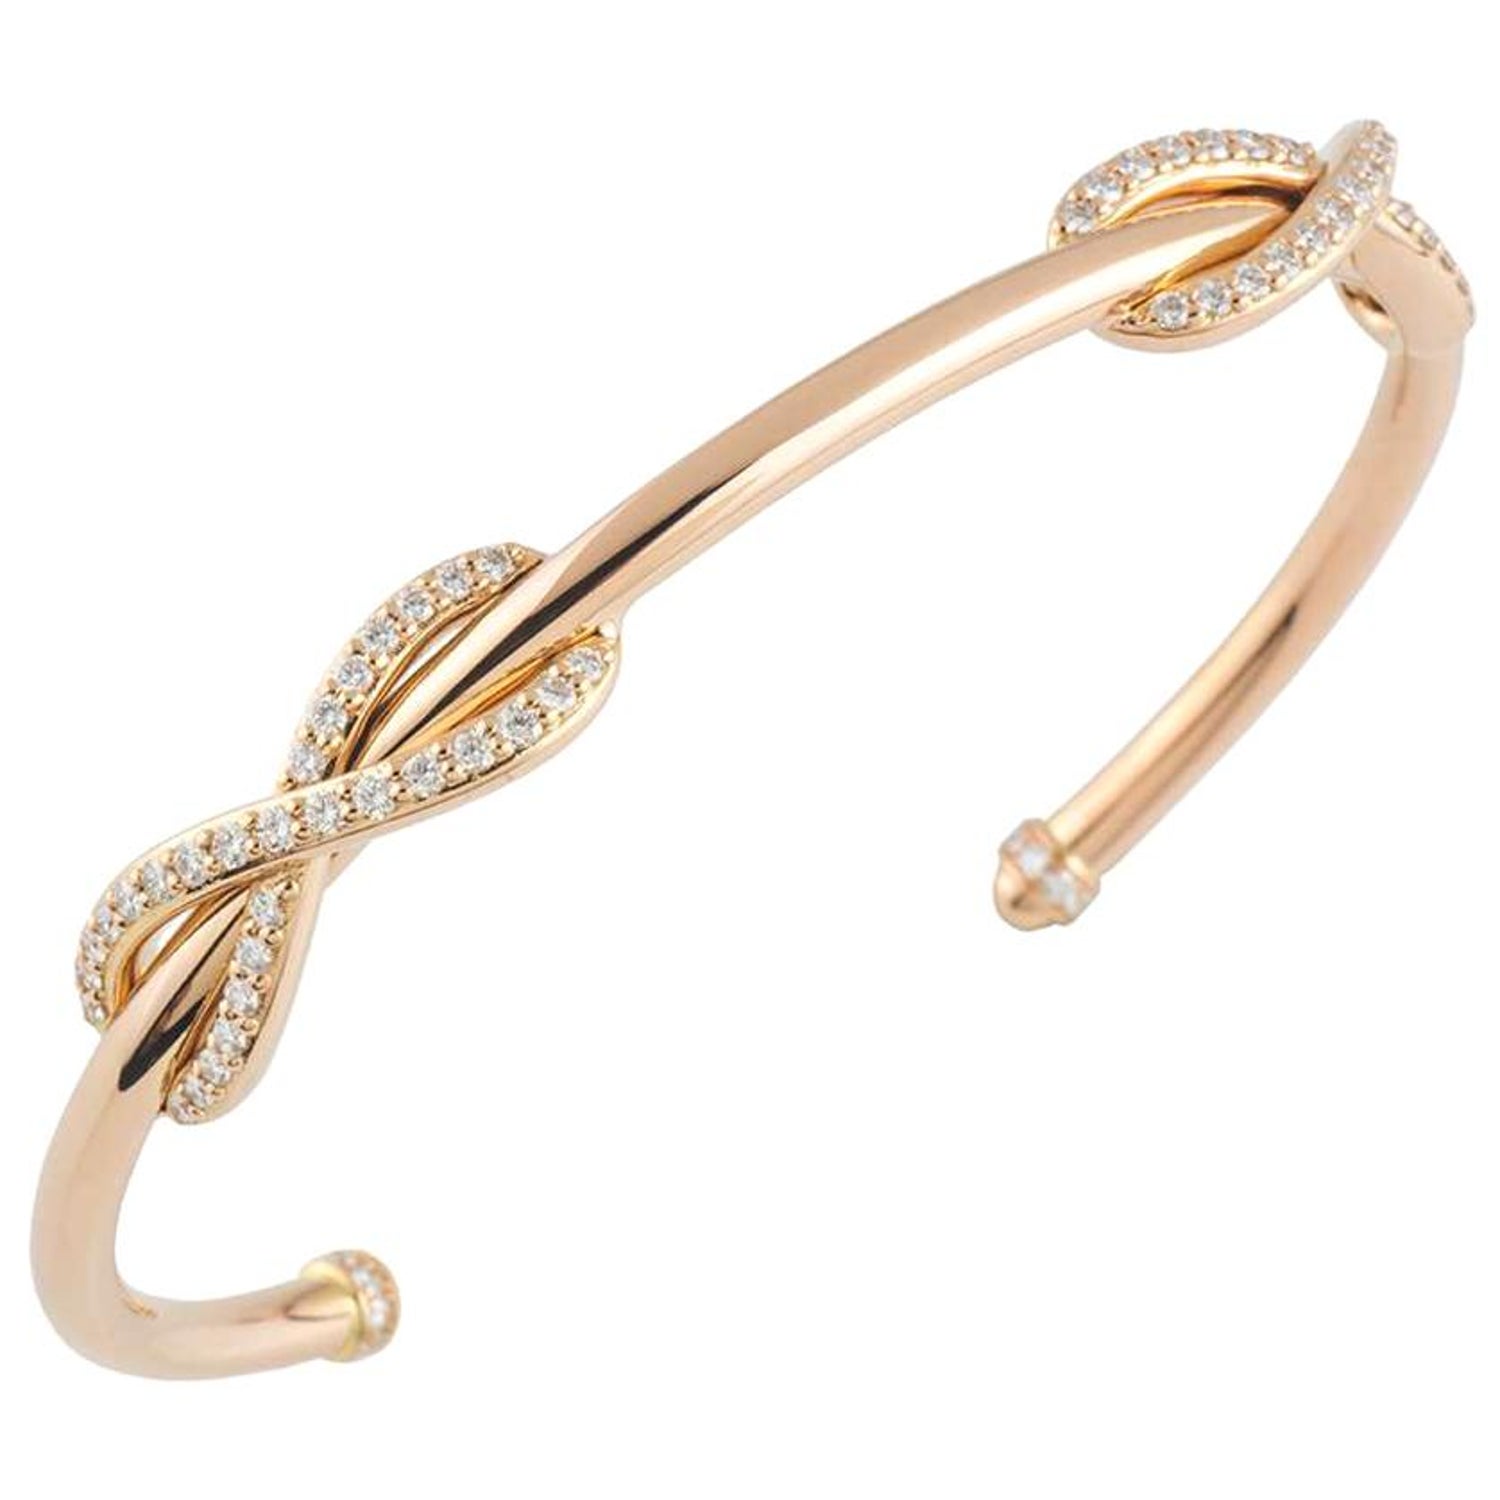 Tiffany Infinity Cuff - 7 For Sale on 1stDibs | tiffany infinity bracelet  cuff, tiffany infinity bracelet rose gold